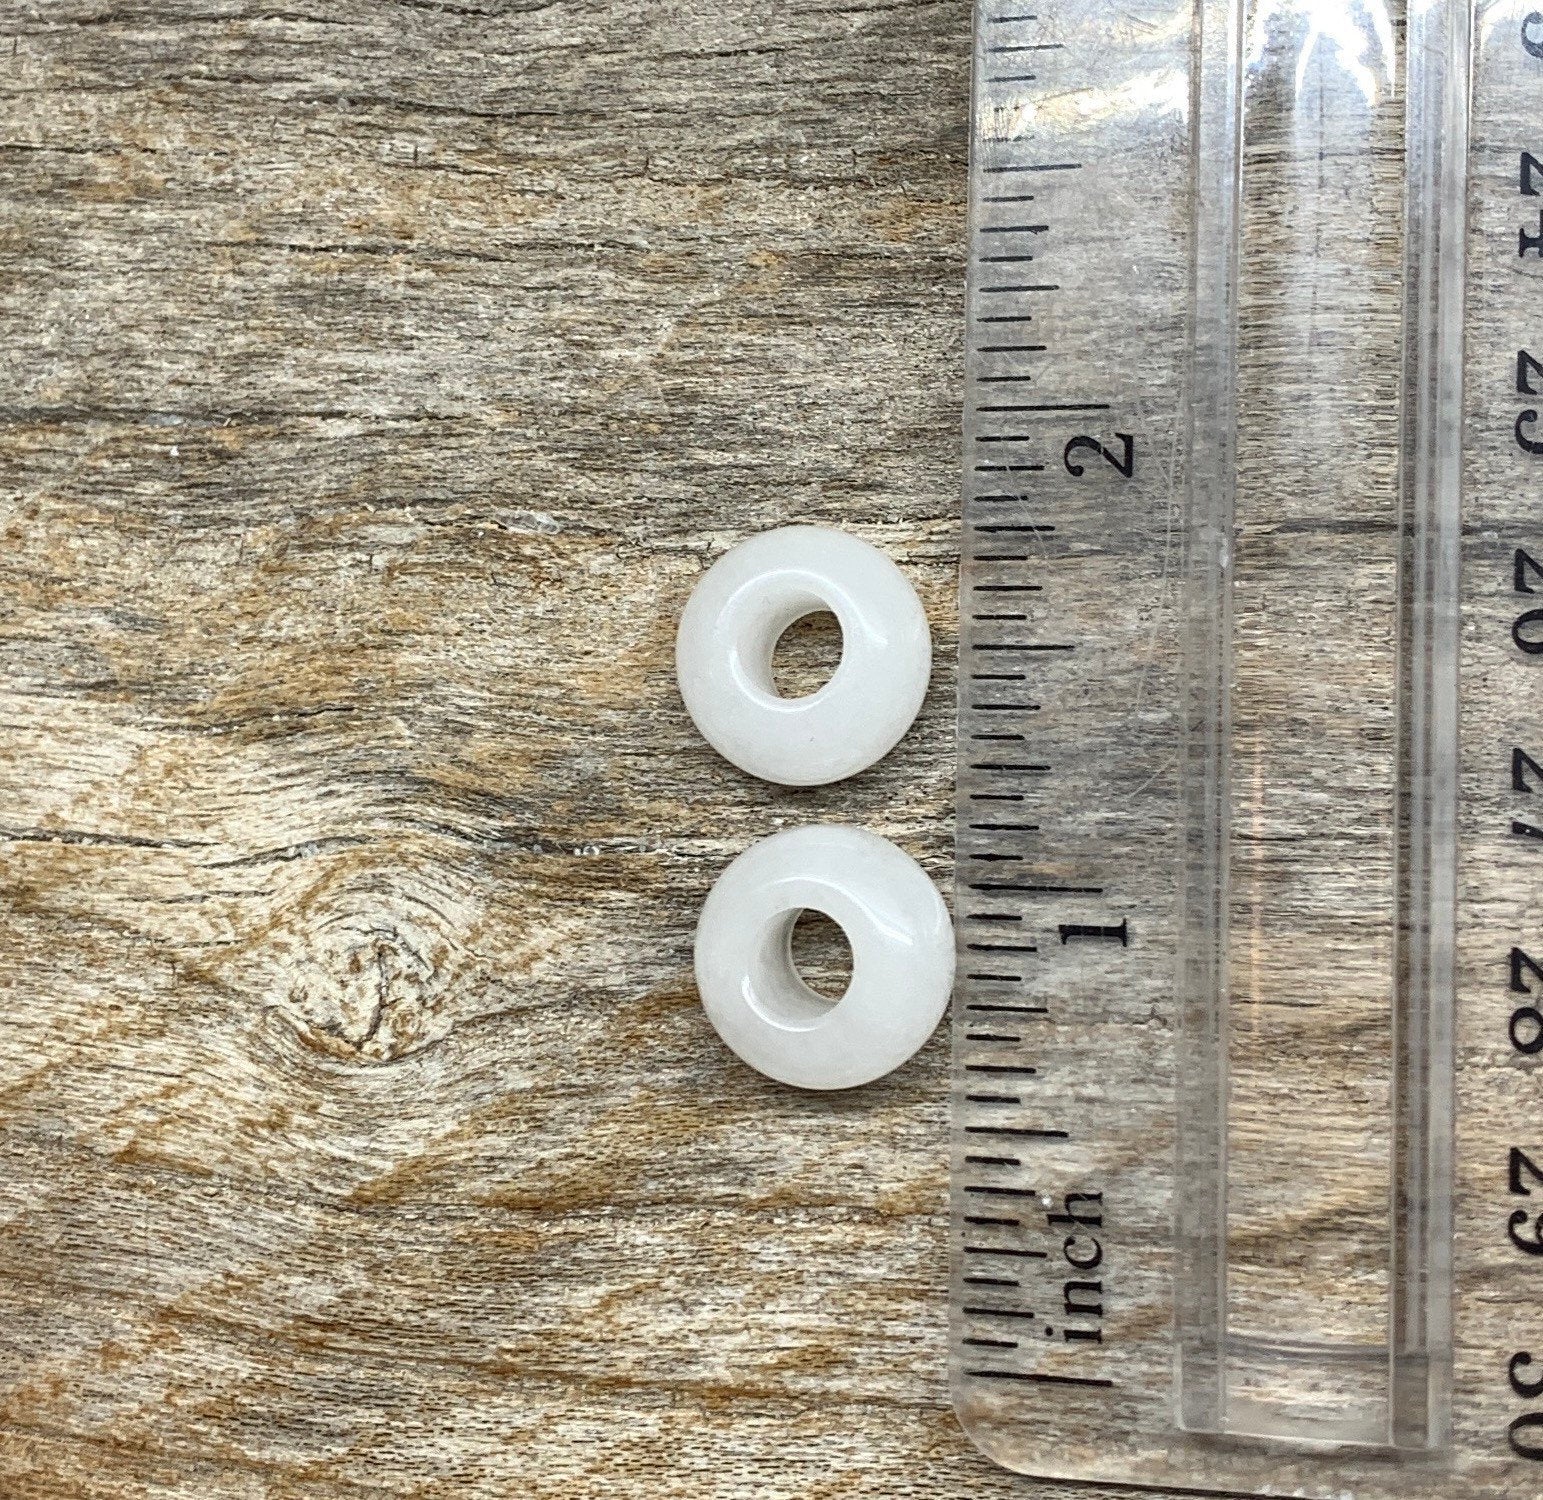 "Close-up of 14mm snow quartz crystal beads, showcasing their translucent white color and smooth surface texture, positioned next to a ruler